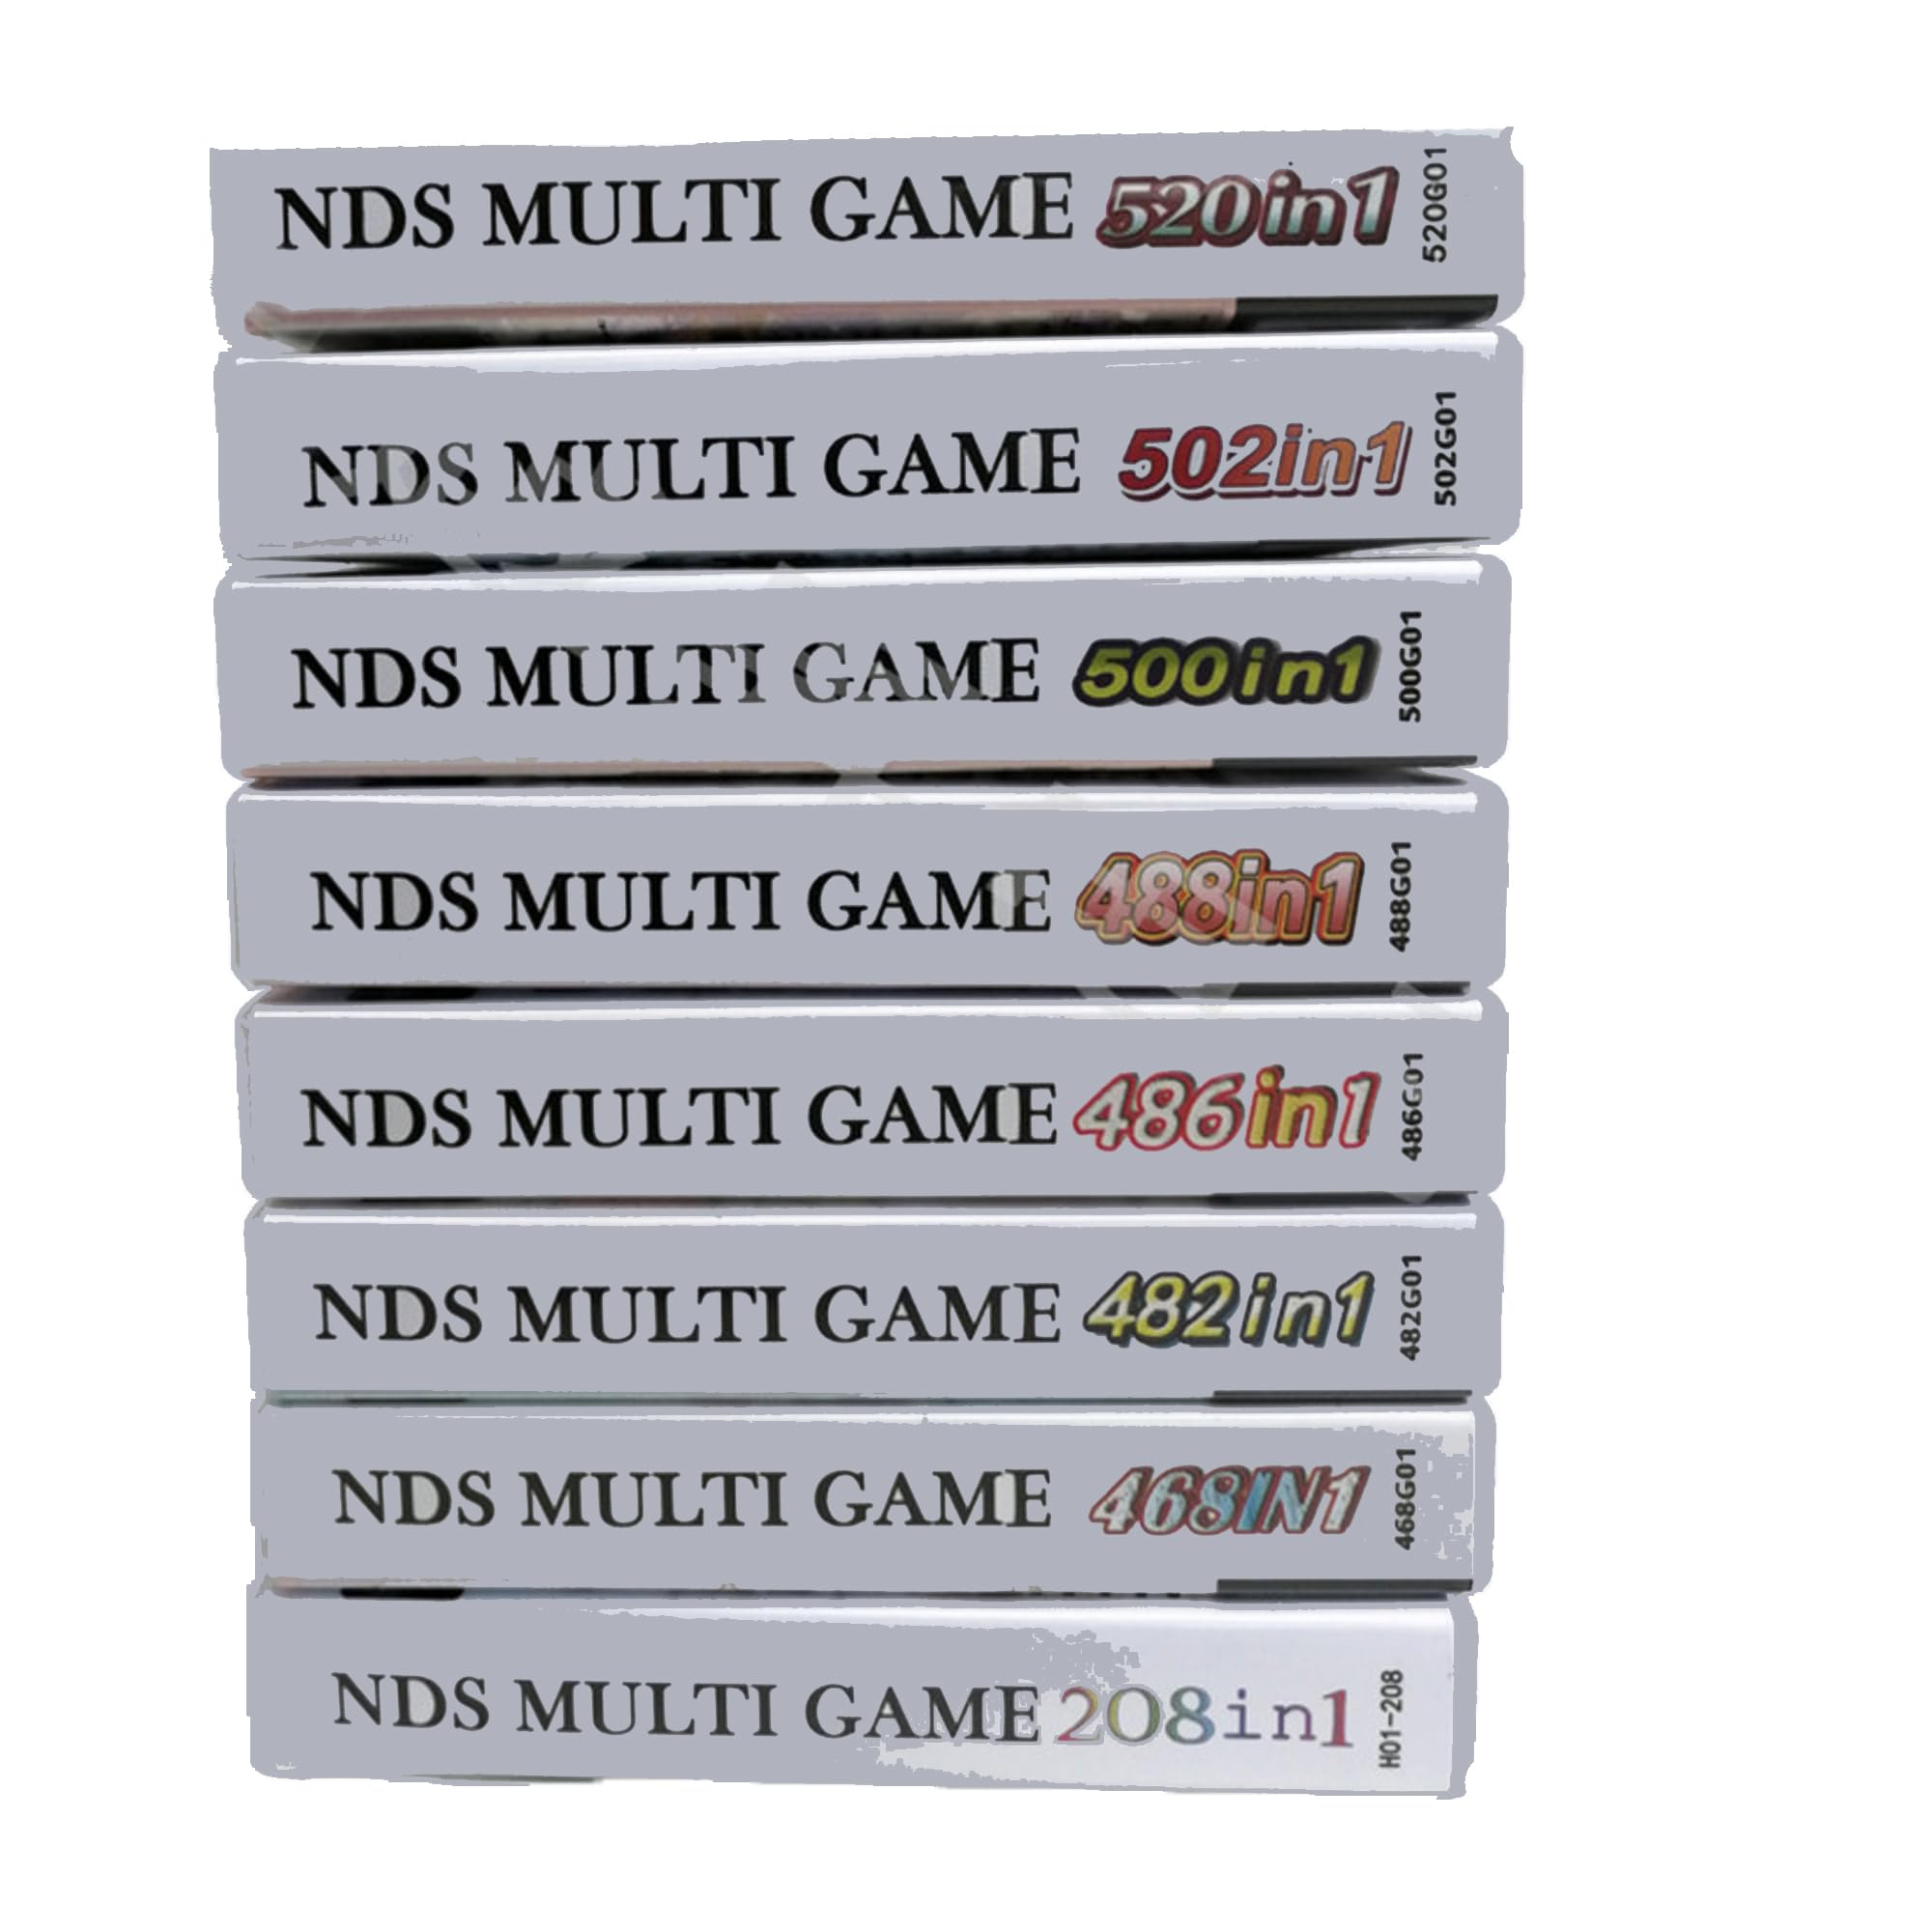 208 in 1 MULTI CART Super Combo Video Games Cartridge Card Cart for Nintendo DS NDS 3DS XL 3DSXL 2DS NDSL NDSI